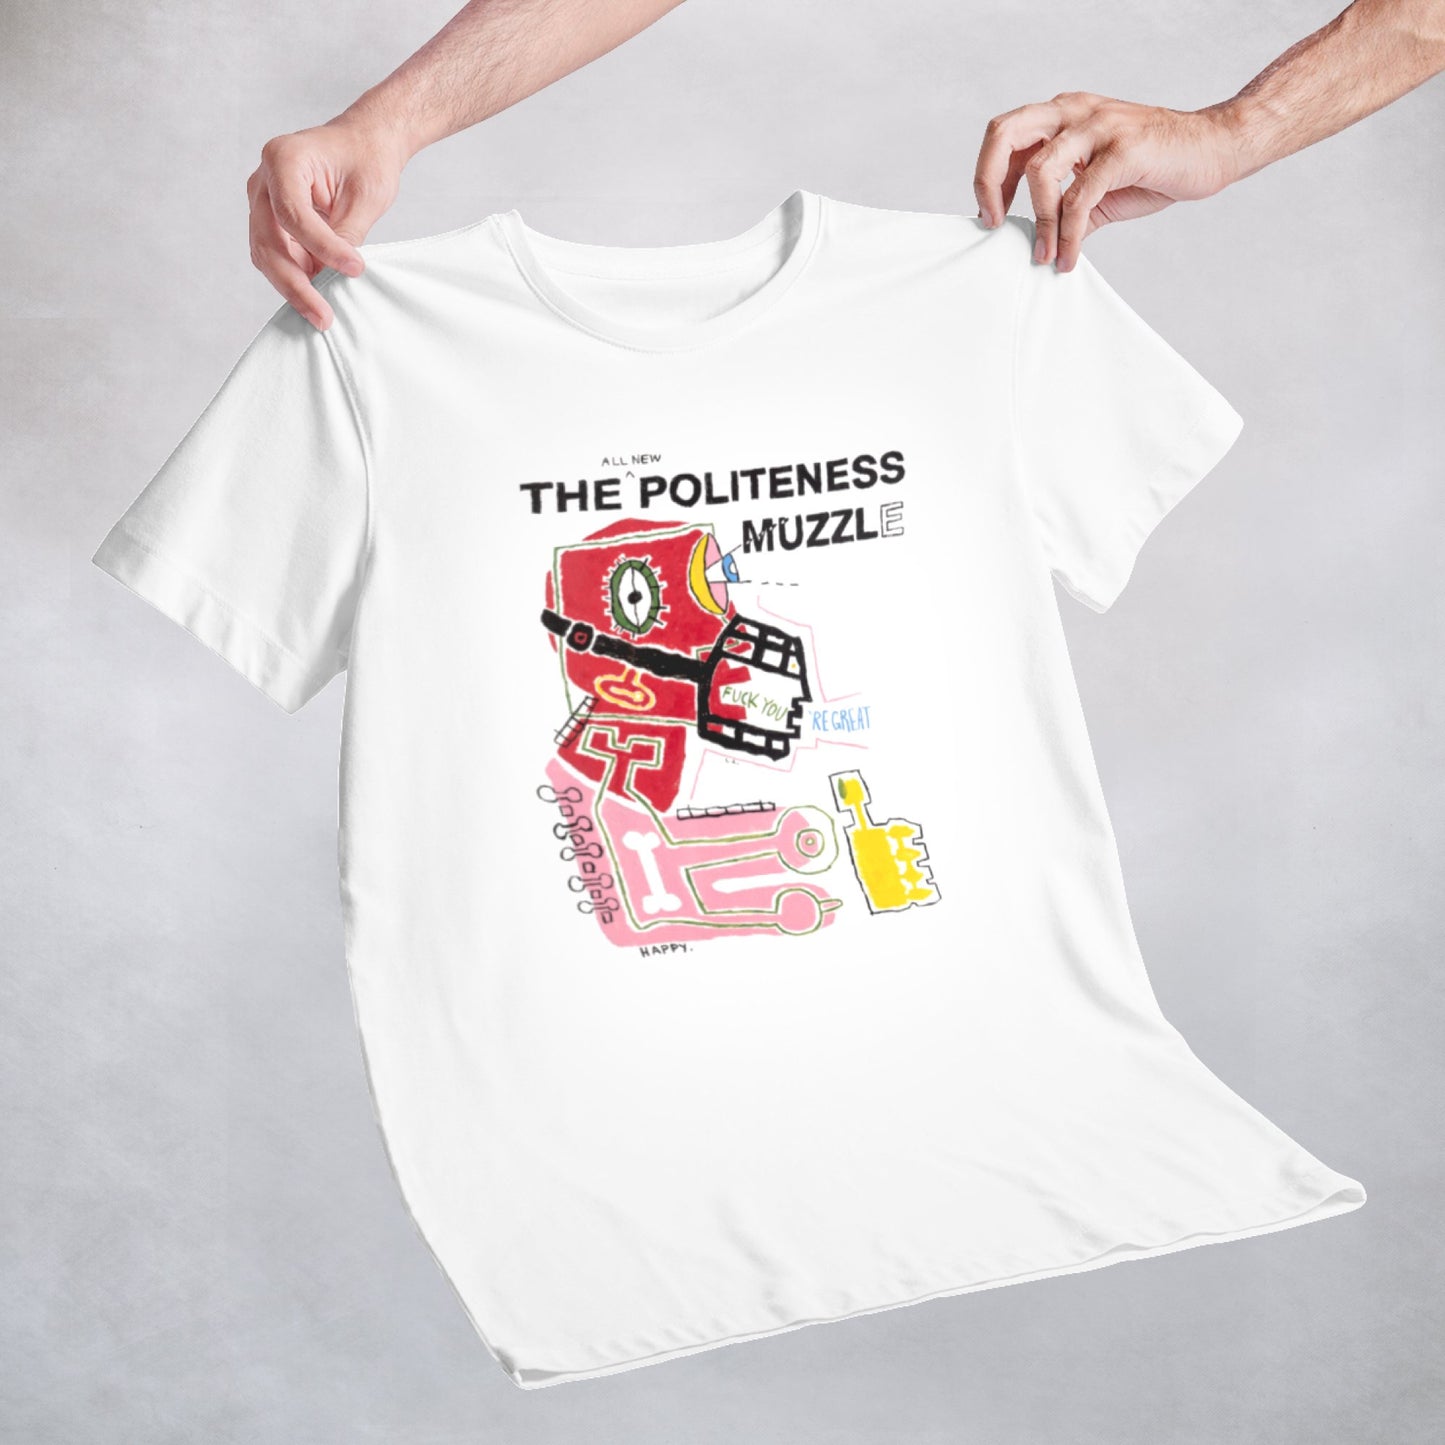 Classy Duds Short Sleeve T-Shirts Politeness Muzzle Tee by Happy Thrilmore